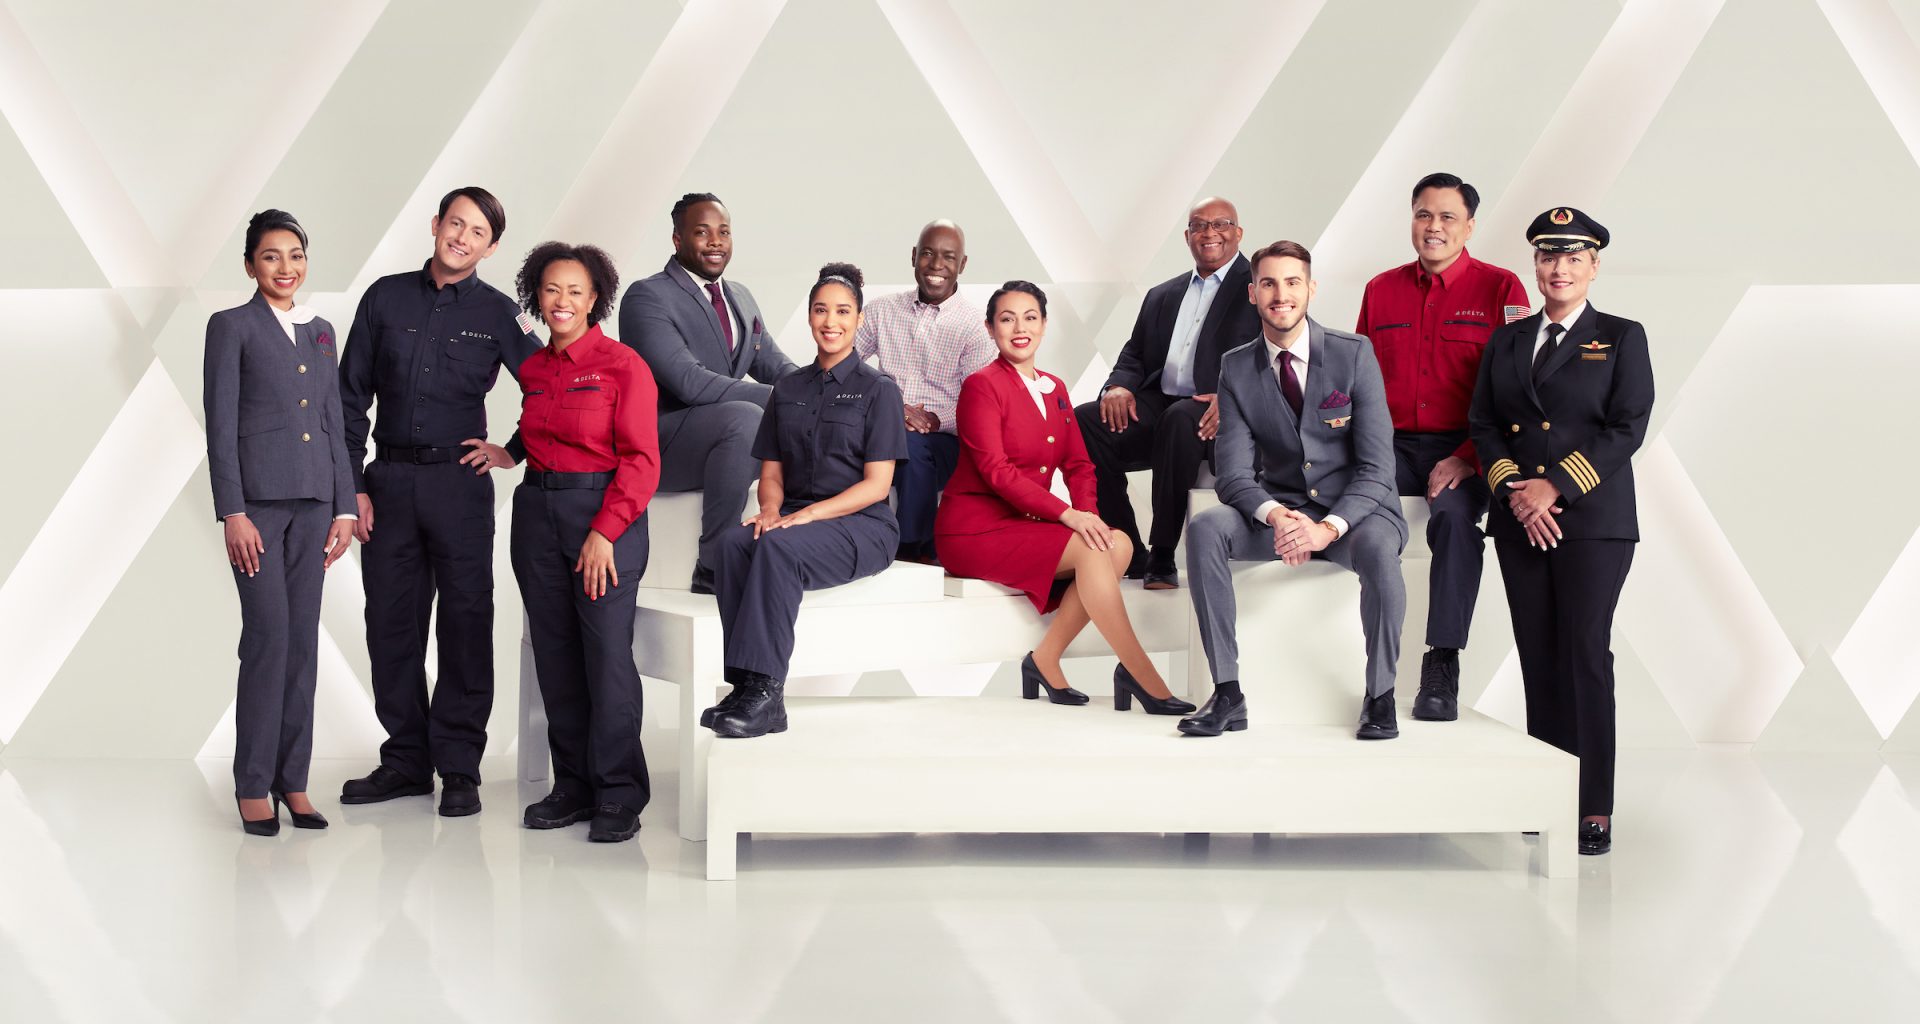 Delta is 6th Best Employer: A line of people of different ethnicities to illustrate Delta reports.